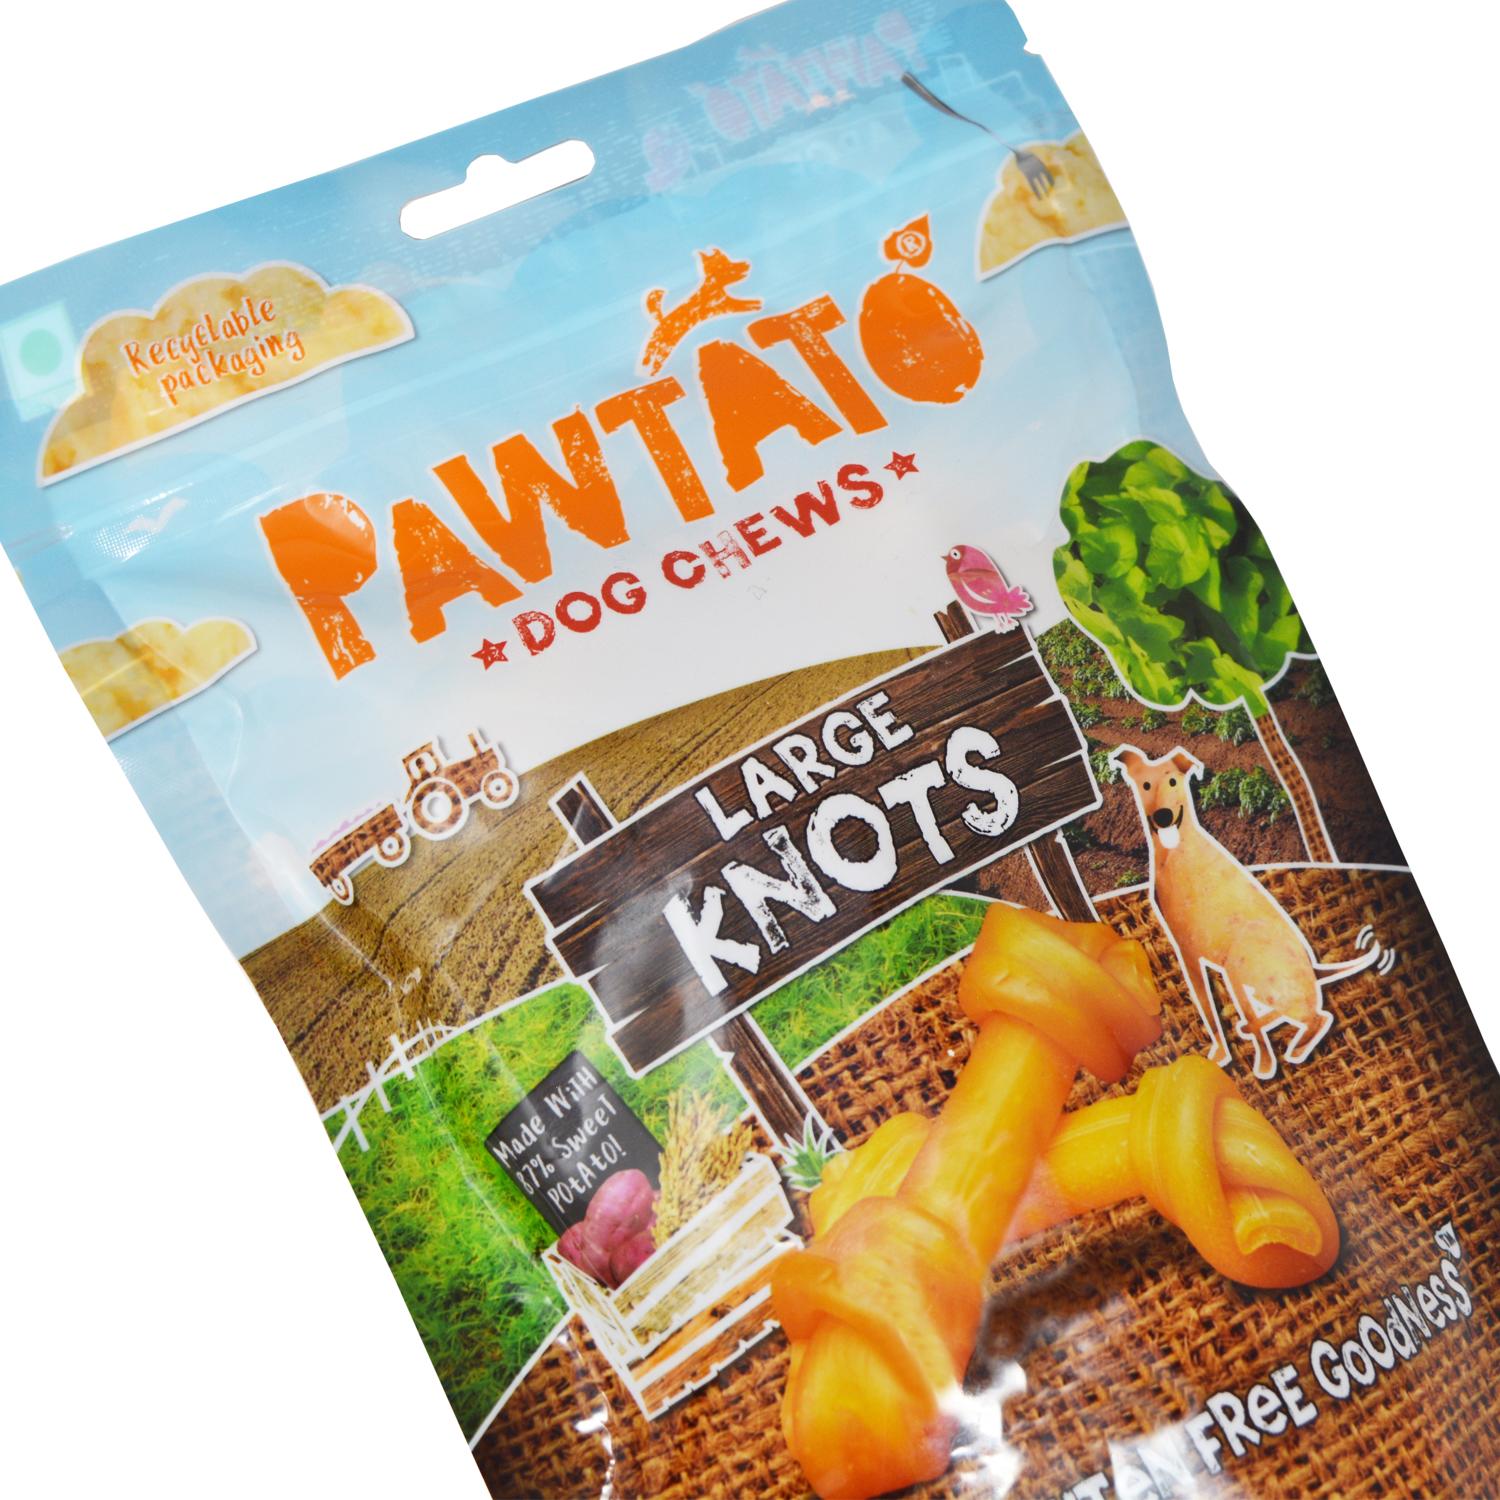 Close up of a pack of Pawtato Large Knot vegan dog chews